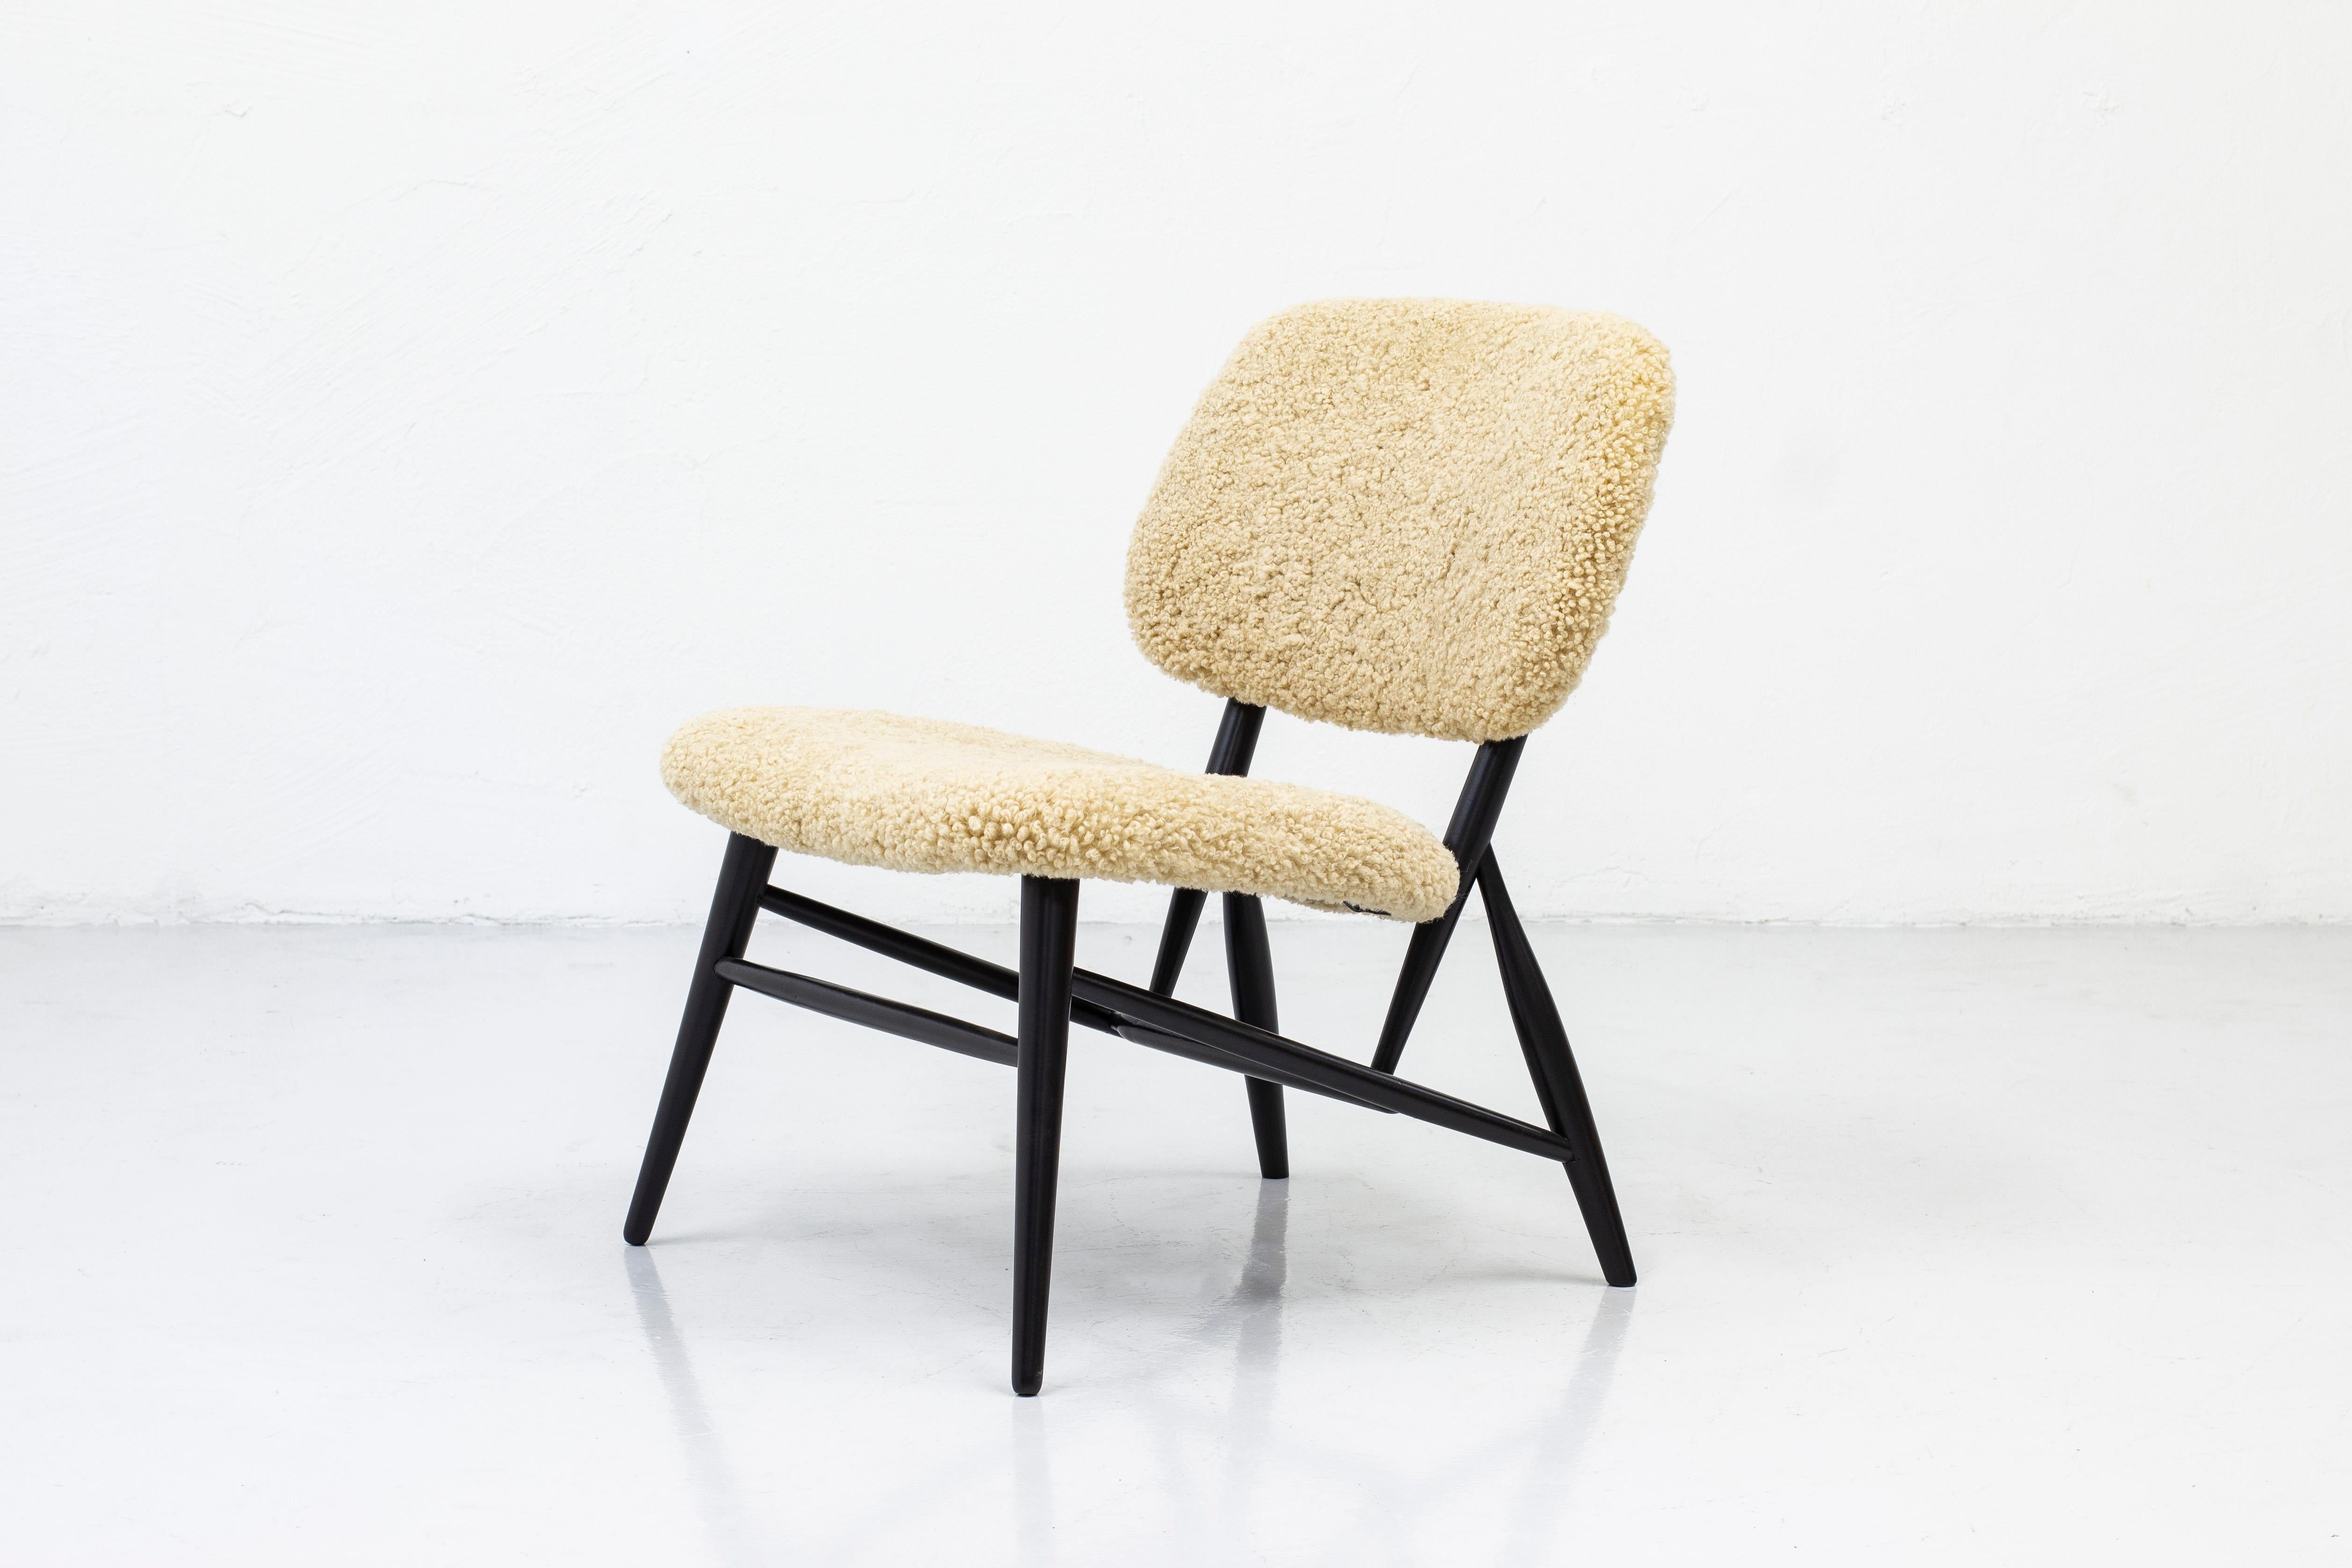 Lounge chair by Diö Slöjd & Möbler. In the manner of Alf Svenssons Te-Ve lounge chair Produced in Sweden during the 1950s. Solid beech frame with black paint and new sheep skin upholstery in beige. Excellent vintage condition with few signs of